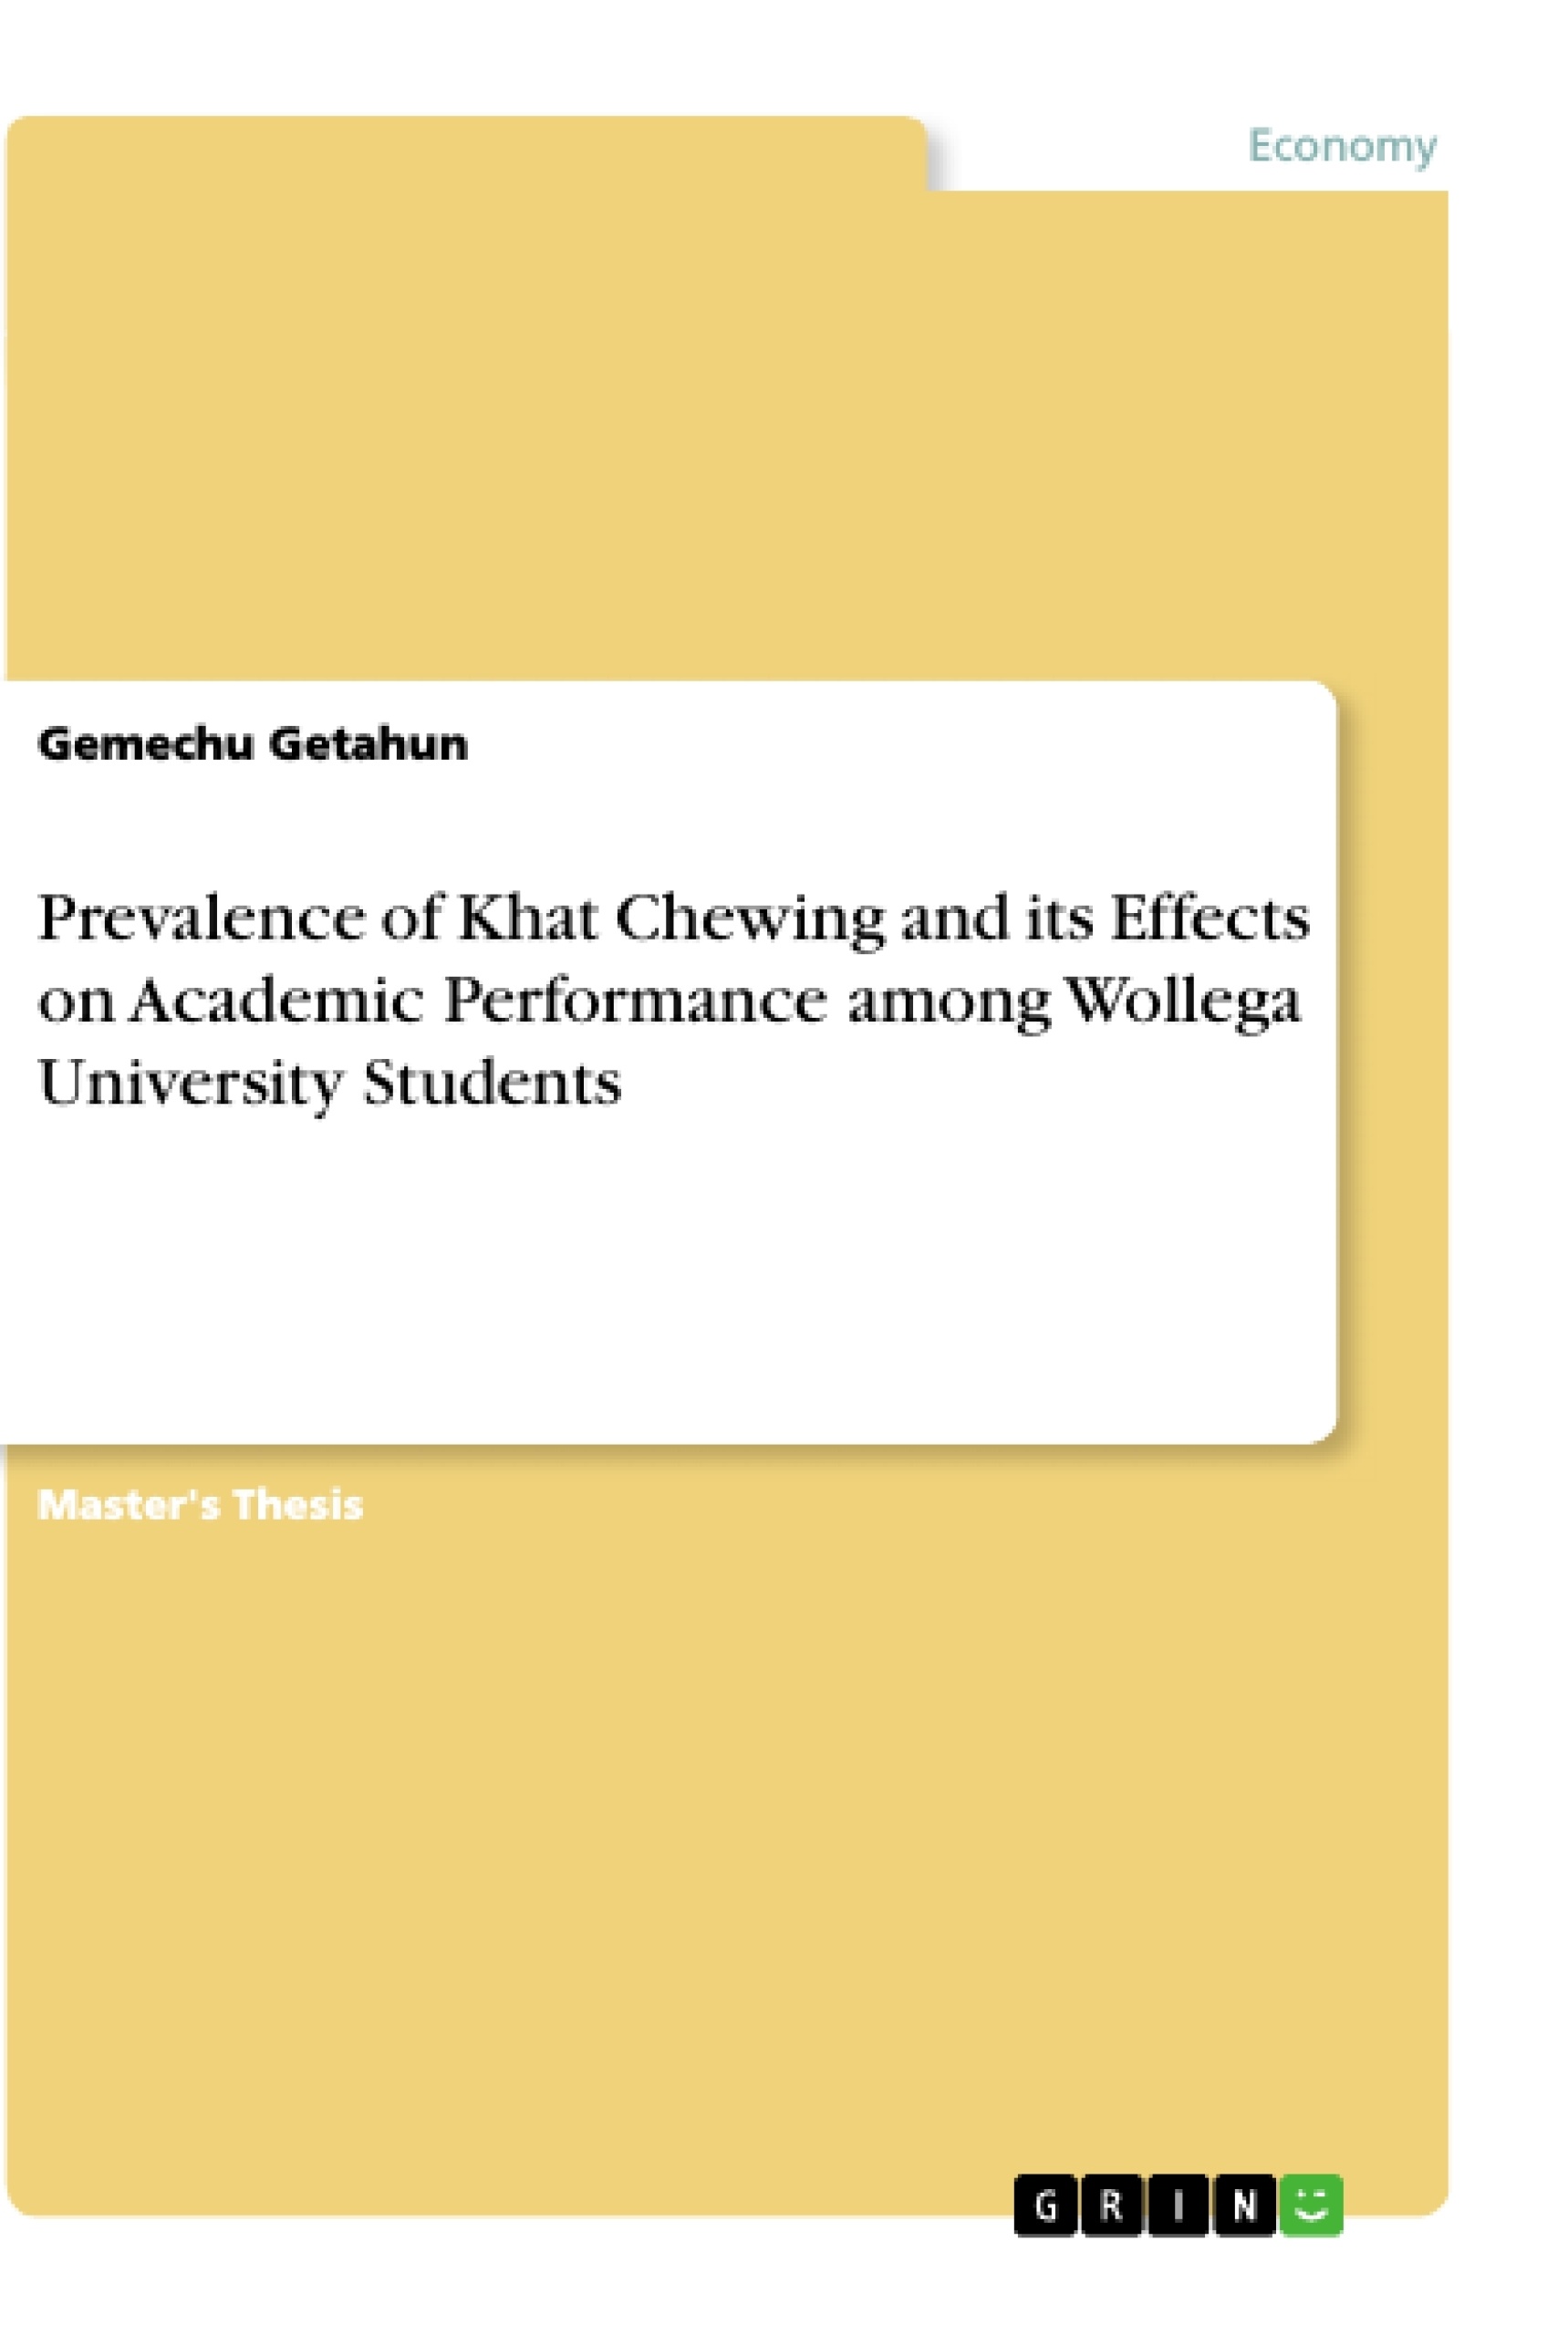 Title: Prevalence of Khat Chewing and its Effects on Academic Performance among Wollega University Students